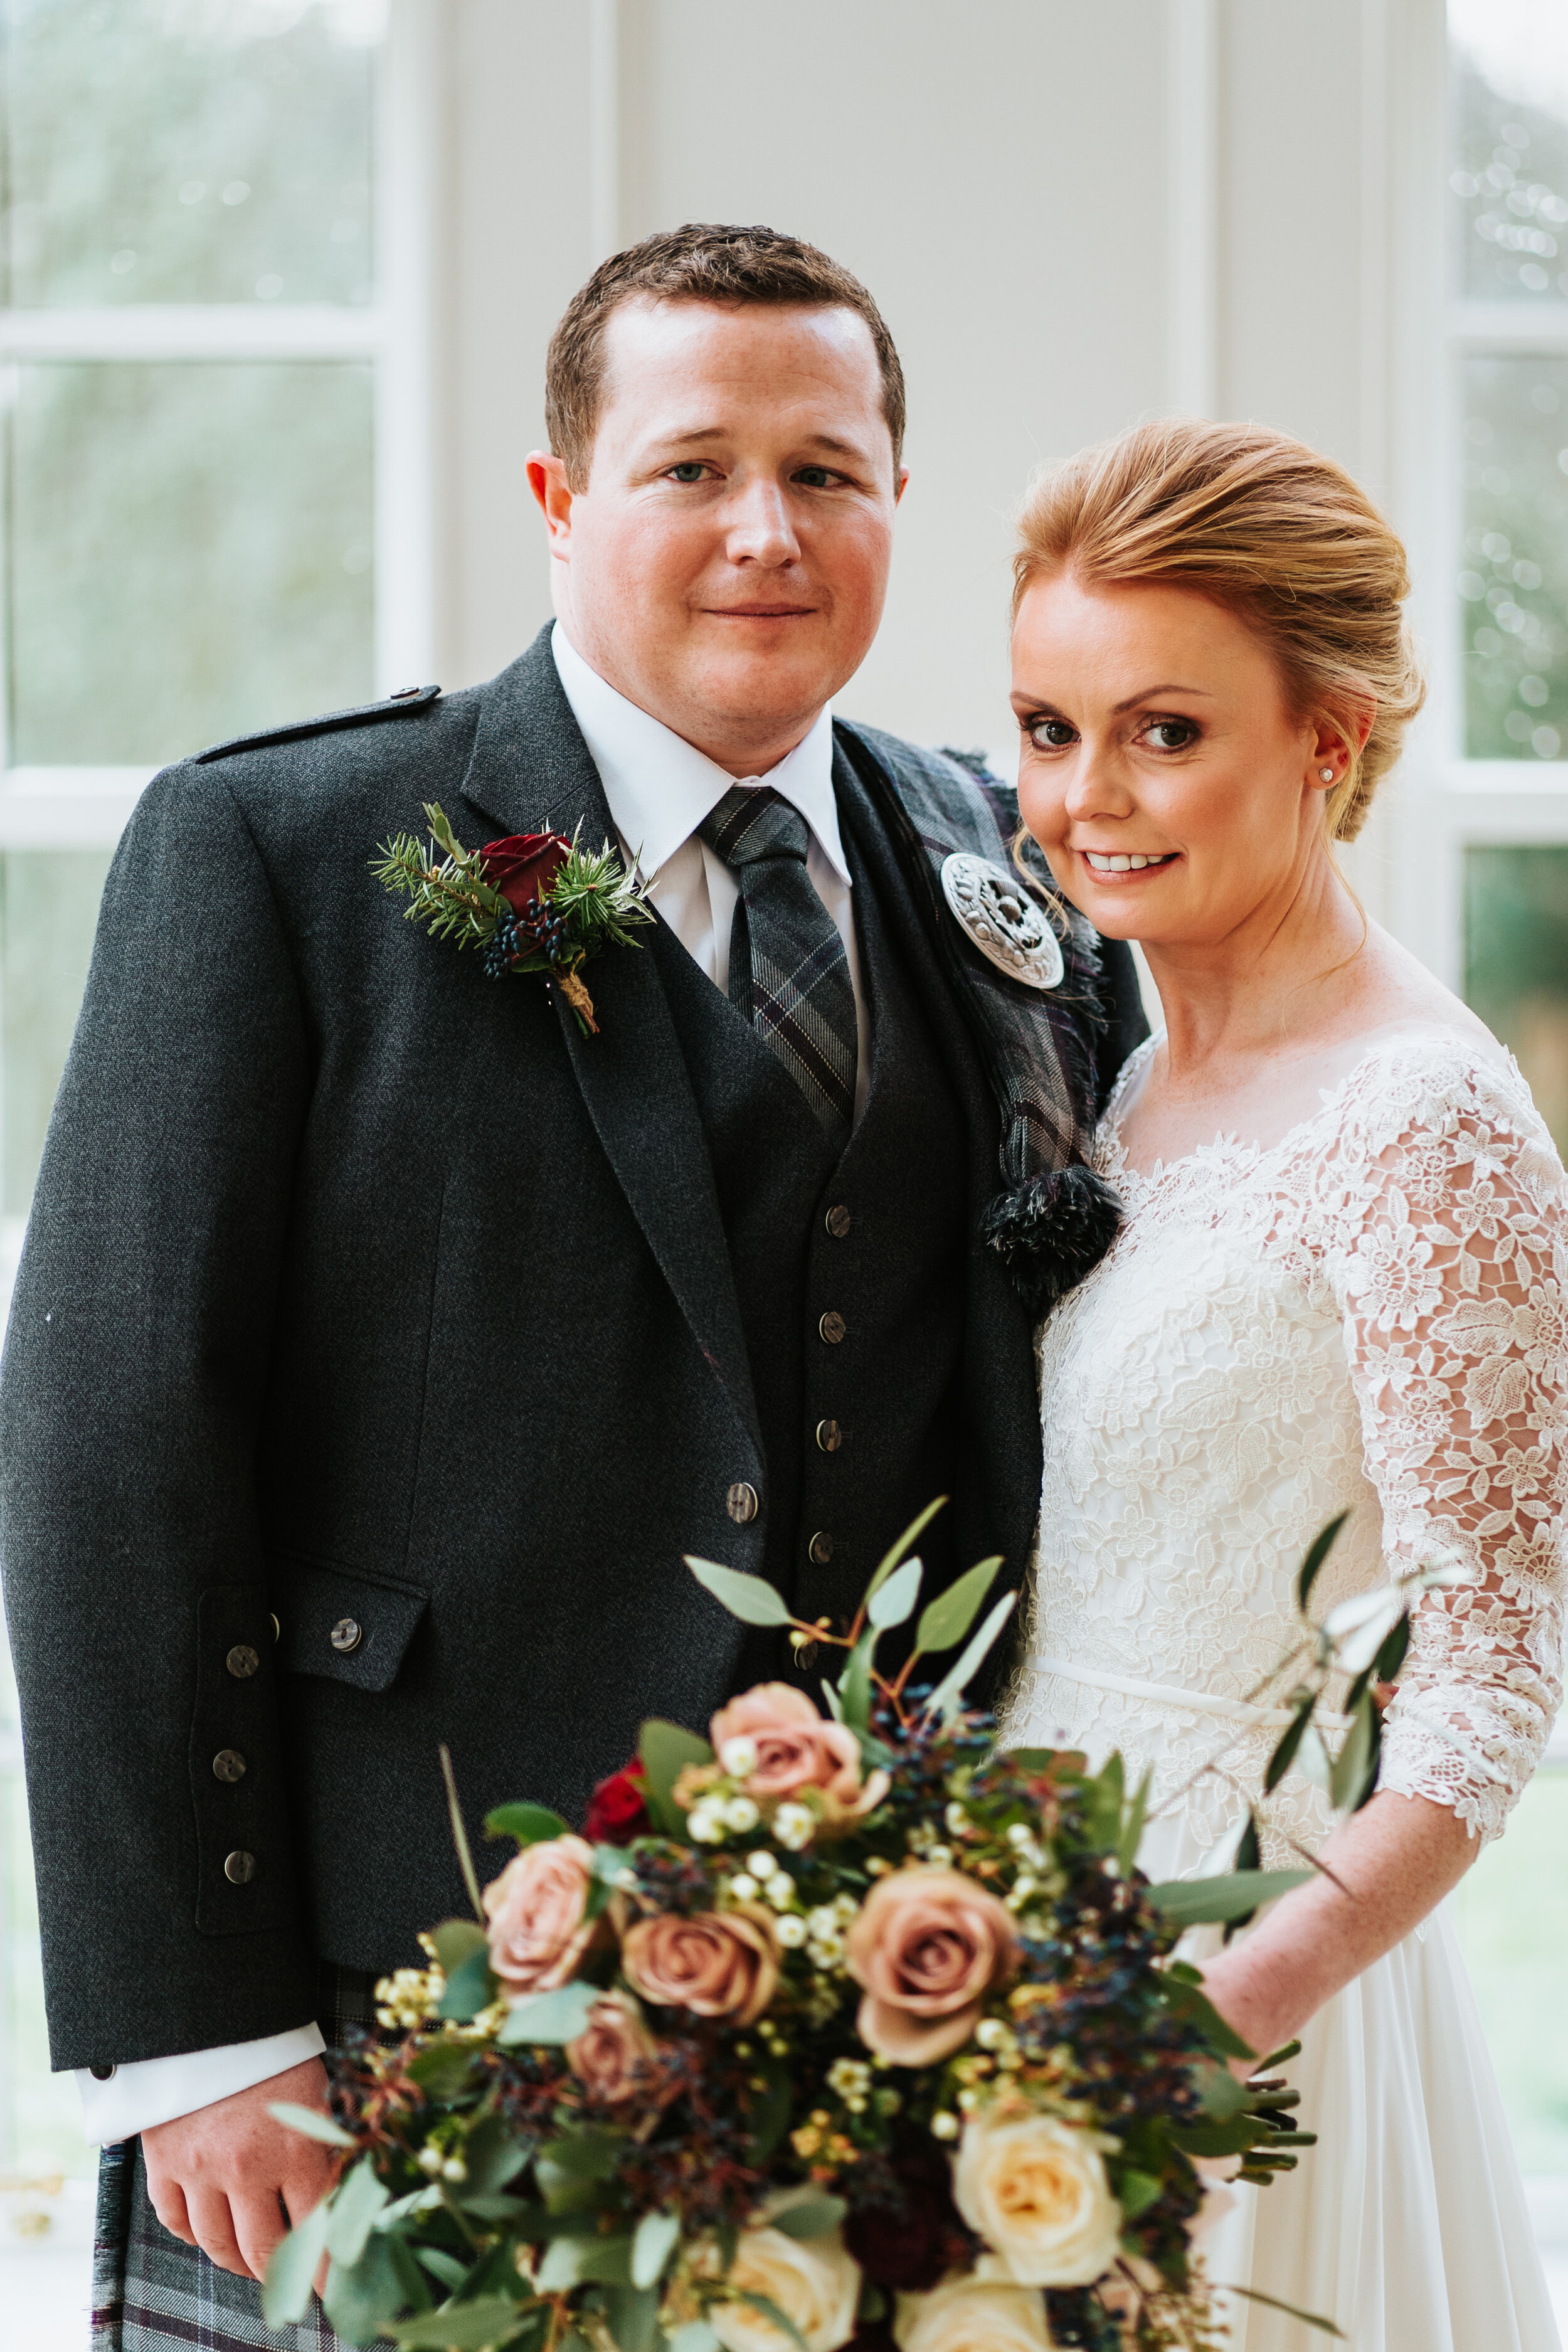 Bride and Groom portrait at Newhall Estate, Scotland 